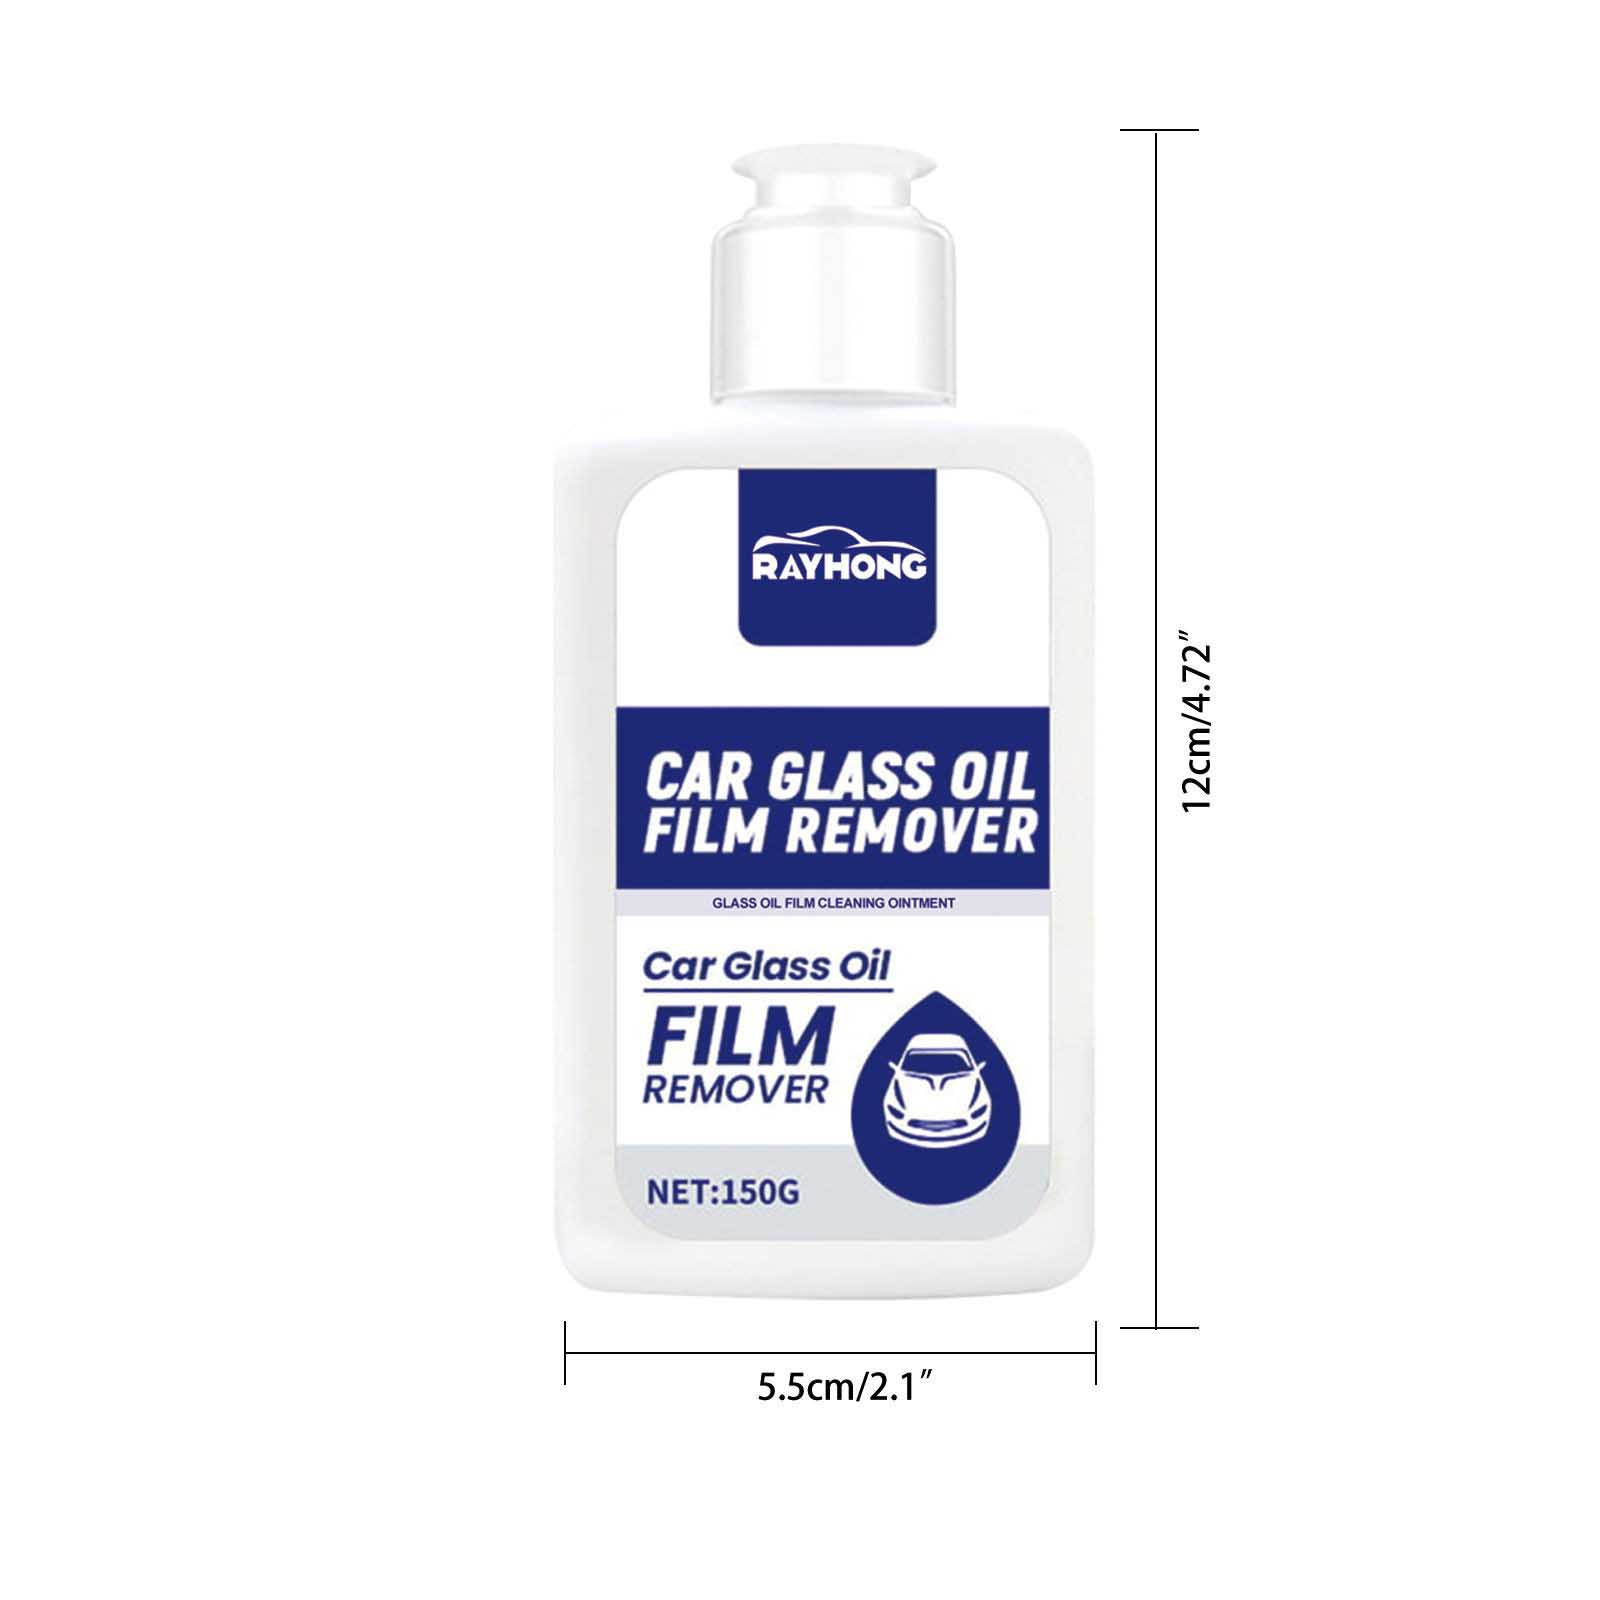 Shengxiny Glass Cleaner Clearance Oil Film Remover for Car Glass, Windscreen Cleaner, Oil Film Cleaner, Rain Proof and Proof Car Glass Oil Film